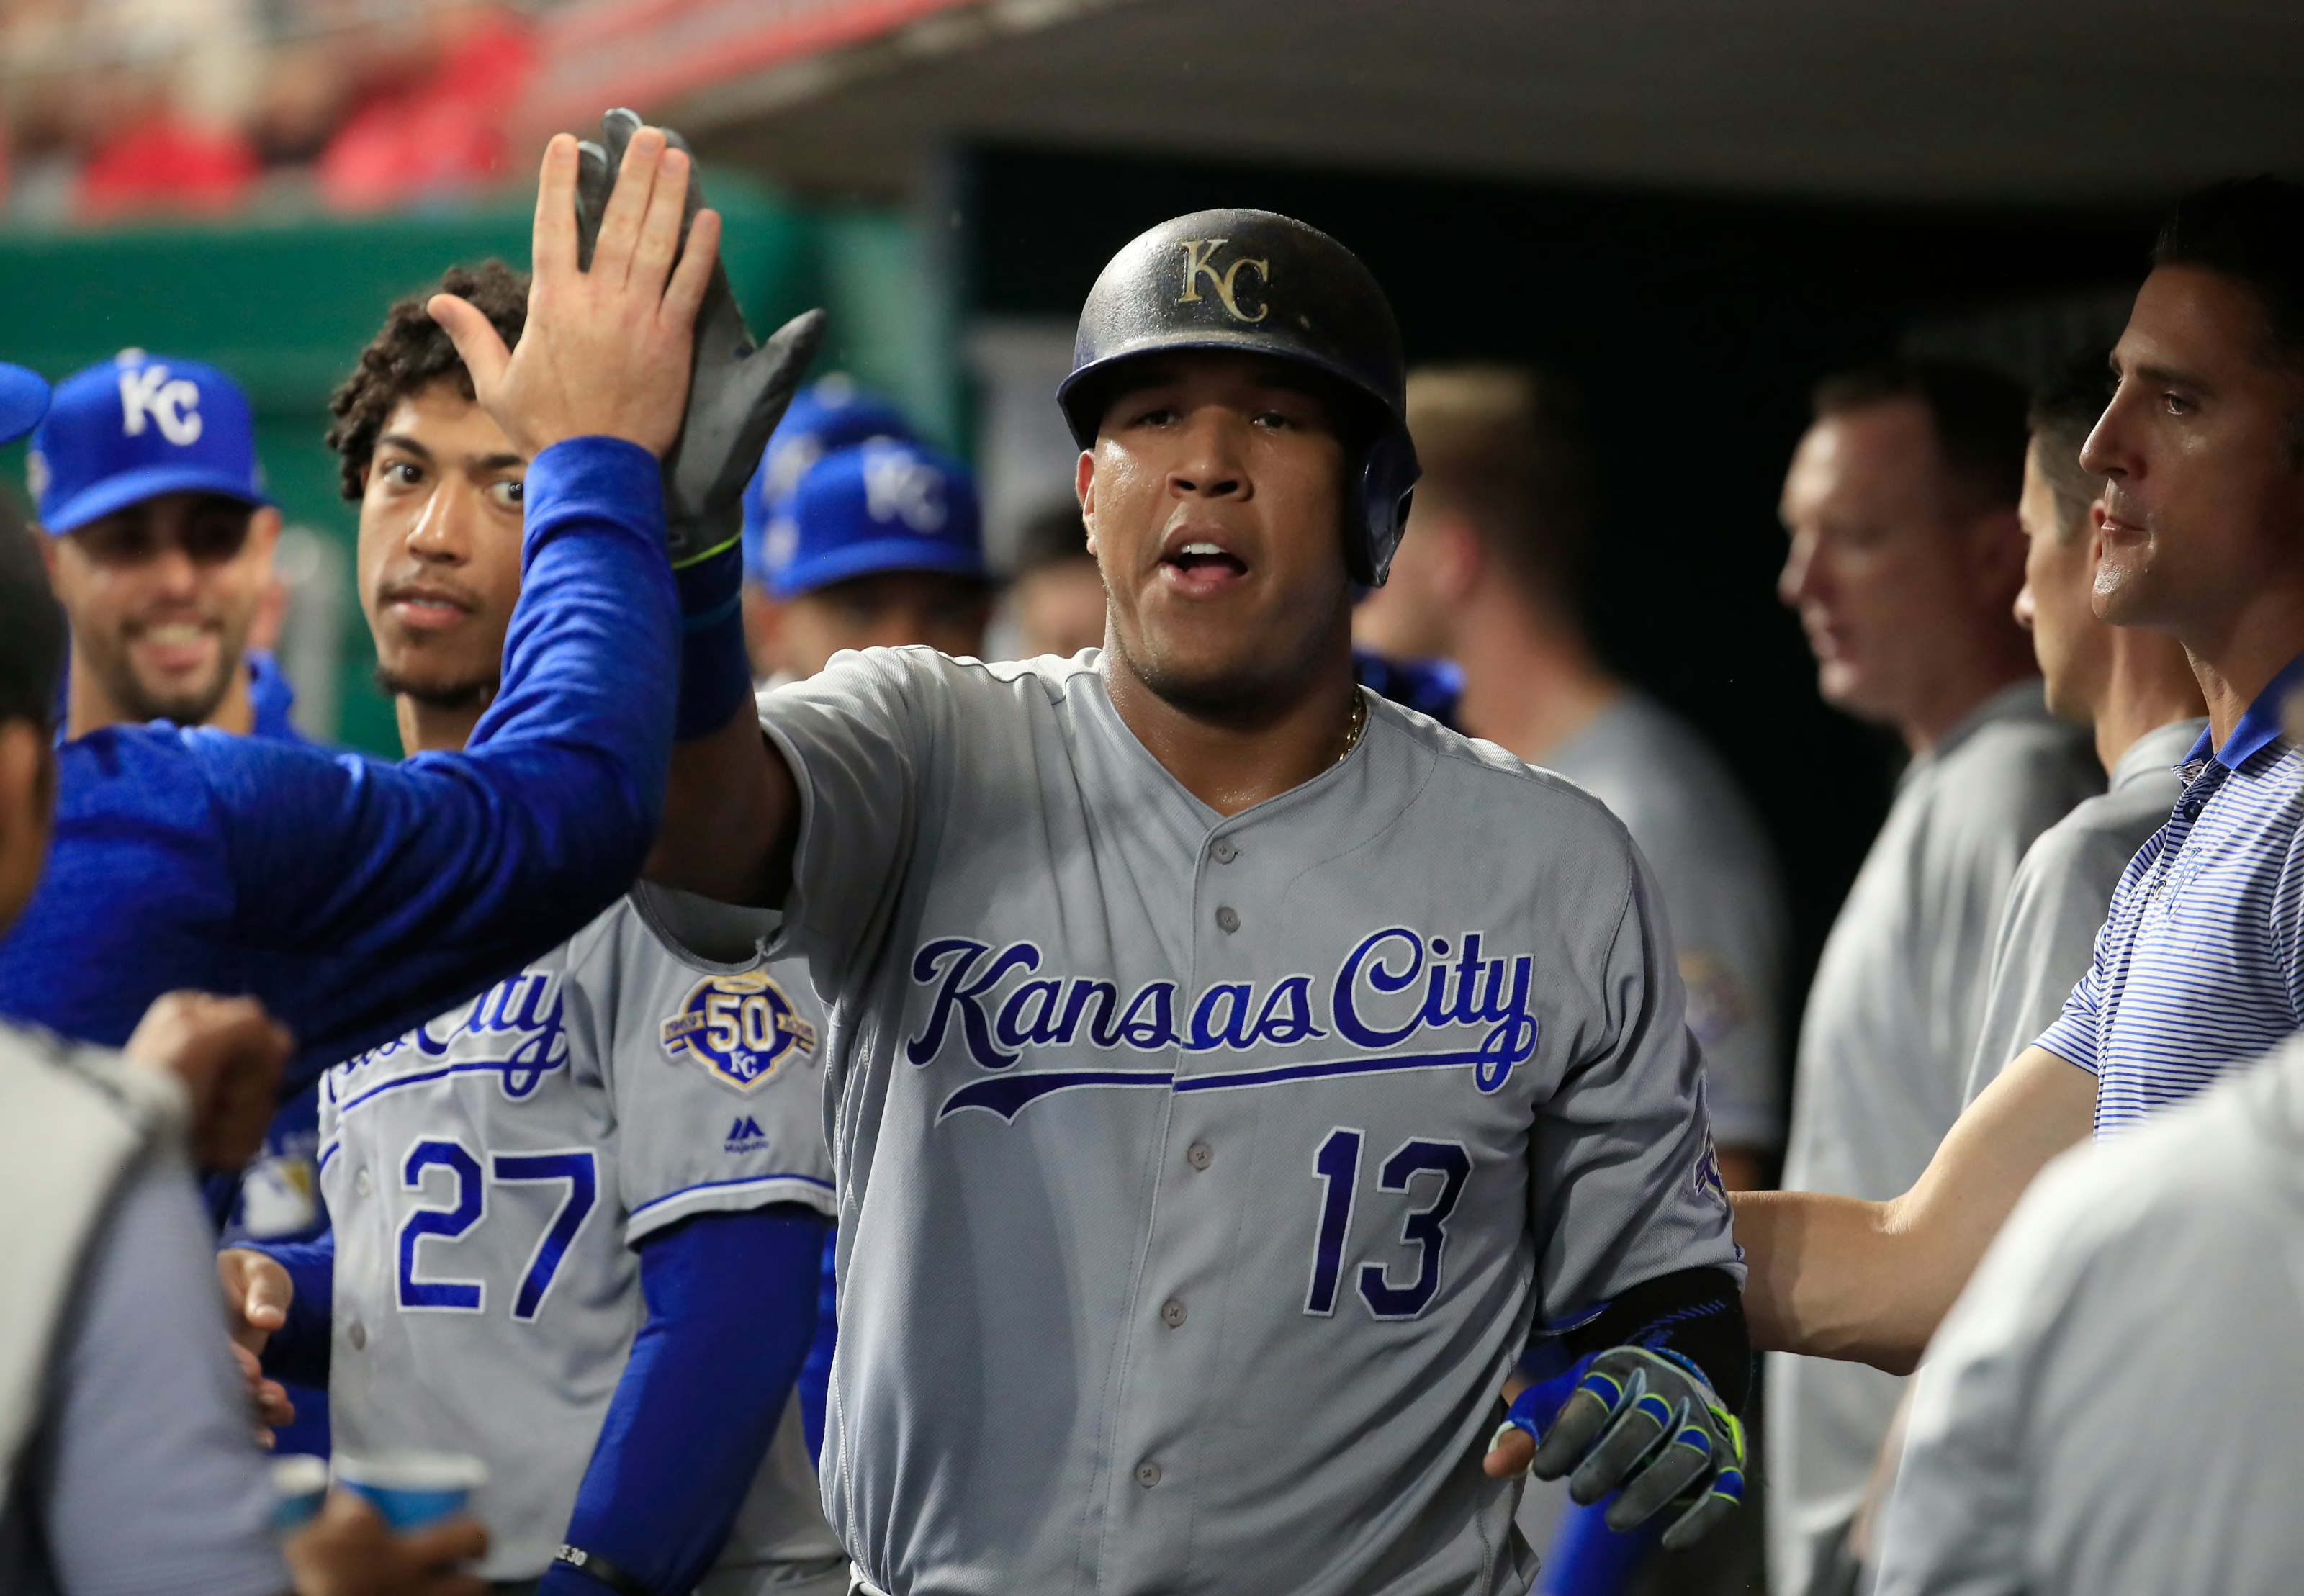 Houston Astros: 3 reasons to pry Salvador Perez away from the Royals